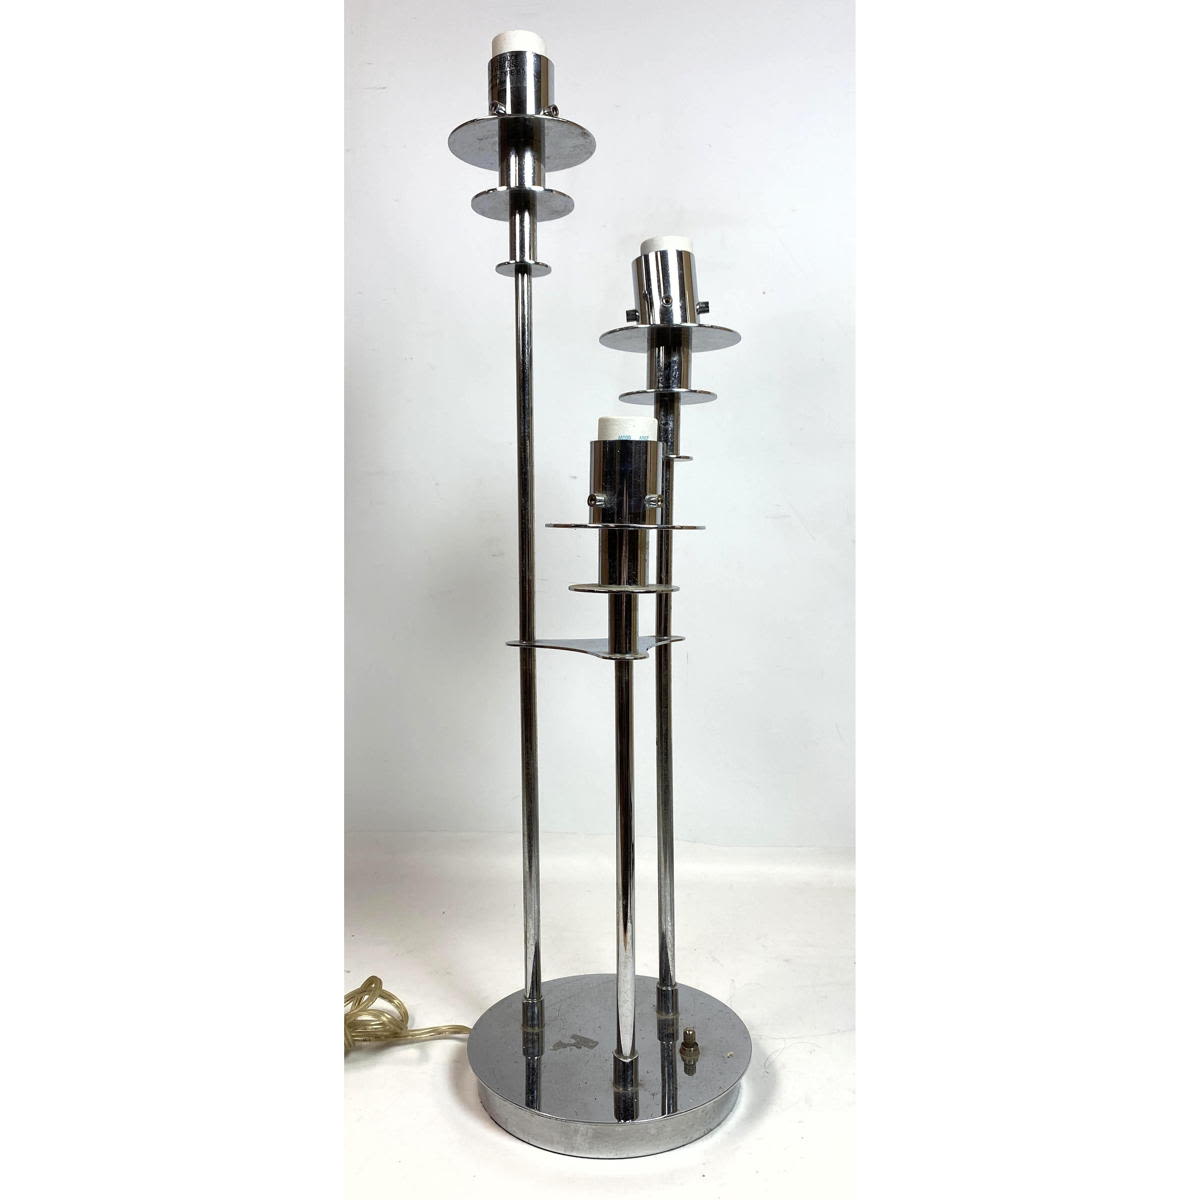 Modernist Chrome Table Lamp Dimensions  2baed1